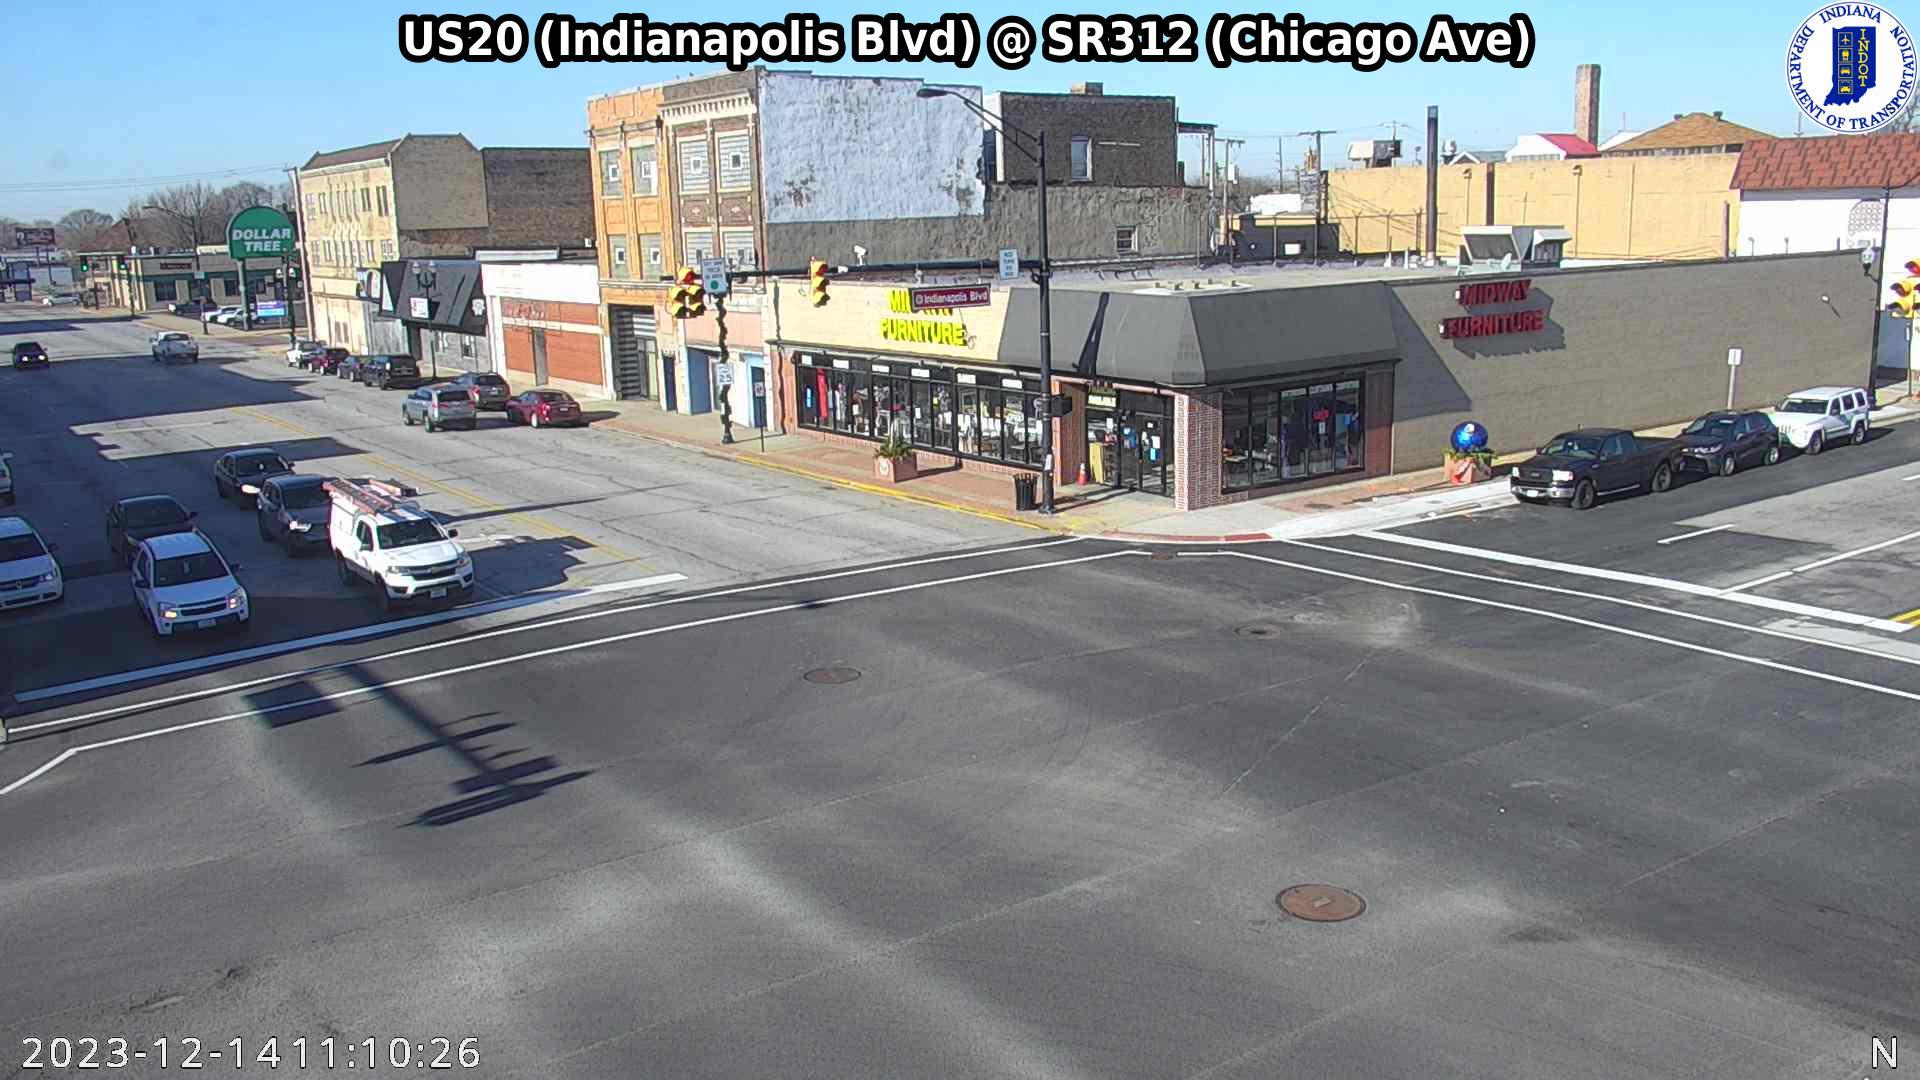 Southside: SIGNAL: US20 (Indianapolis Blvd) @ SR312 (Chicago Ave Traffic Camera